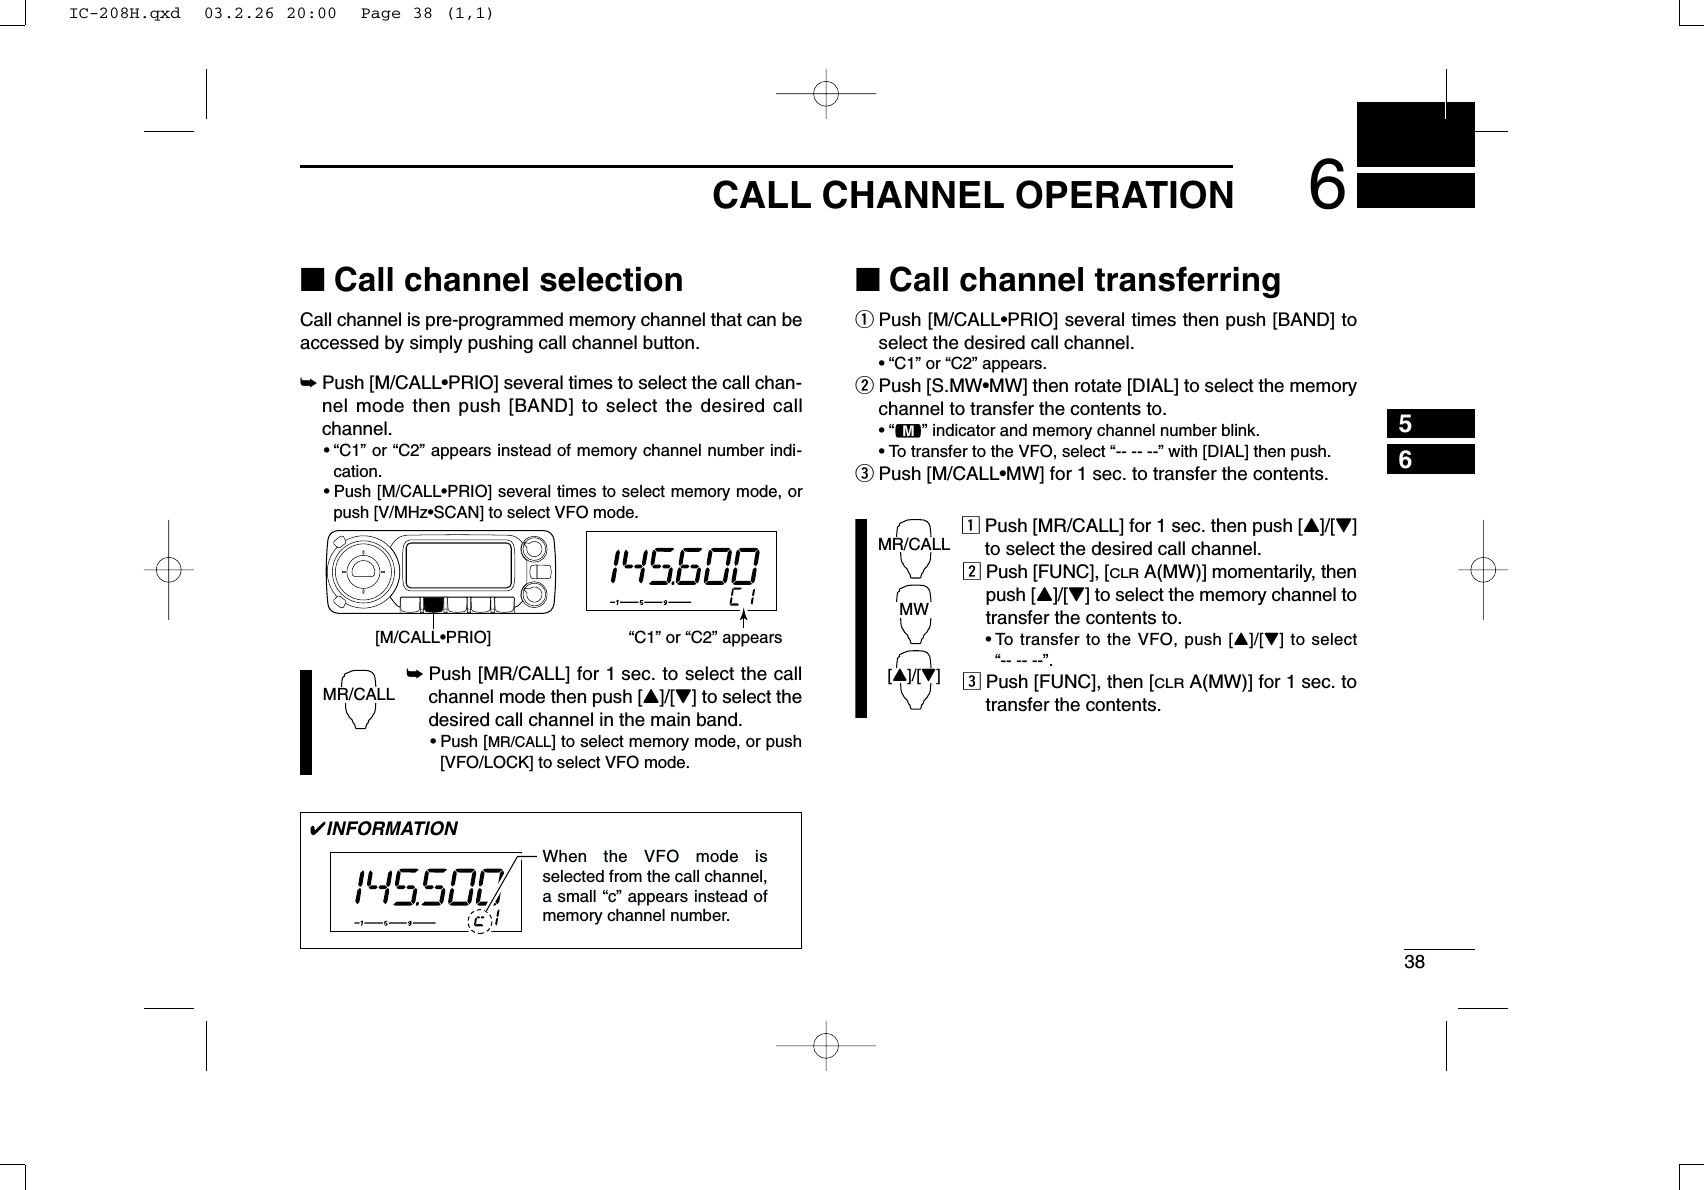 386CALL CHANNEL OPERATION56■Call channel selectionCall channel is pre-programmed memory channel that can beaccessed by simply pushing call channel button.➥Push [M/CALL•PRIO] several times to select the call chan-nel mode then push [BAND] to select the desired callchannel.•“C1” or “C2” appears instead of memory channel number indi-cation.•Push [M/CALL•PRIO] several times to select memory mode, orpush [V/MHz•SCAN] to select VFO mode.➥Push [MR/CALL] for 1 sec. to select the callchannel mode then push [Y]/[Z] to select thedesired call channel in the main band.•Push [MR/CALL] to select memory mode, or push[VFO/LOCK] to select VFO mode.■Call channel transferringqPush [M/CALL•PRIO] several times then push [BAND] toselect the desired call channel.•“C1” or “C2” appears.wPush [S.MW•MW] then rotate [DIAL] to select the memorychannel to transfer the contents to.•“!” indicator and memory channel number blink.•To transfer to the VFO, select “-- -- --” with [DIAL] then push. ePush [M/CALL•MW] for 1 sec. to transfer the contents.zPush [MR/CALL] for 1 sec. then push [Y]/[Z]to select the desired call channel.xPush [FUNC], [CLRA(MW)] momentarily, thenpush [Y]/[Z] to select the memory channel totransfer the contents to.•To transfer to the VFO, push [Y]/[Z] to select “-- -- --”. cPush [FUNC], then [CLRA(MW)] for 1 sec. totransfer the contents.MR/CALLMW[Y]/[Z]MR/CALL[M/CALL•PRIO] “C1” or “C2” appears✔INFORMATIONWhen the VFO mode is selected from the call channel, a small “c” appears instead of memory channel number. IC-208H.qxd  03.2.26 20:00  Page 38 (1,1)